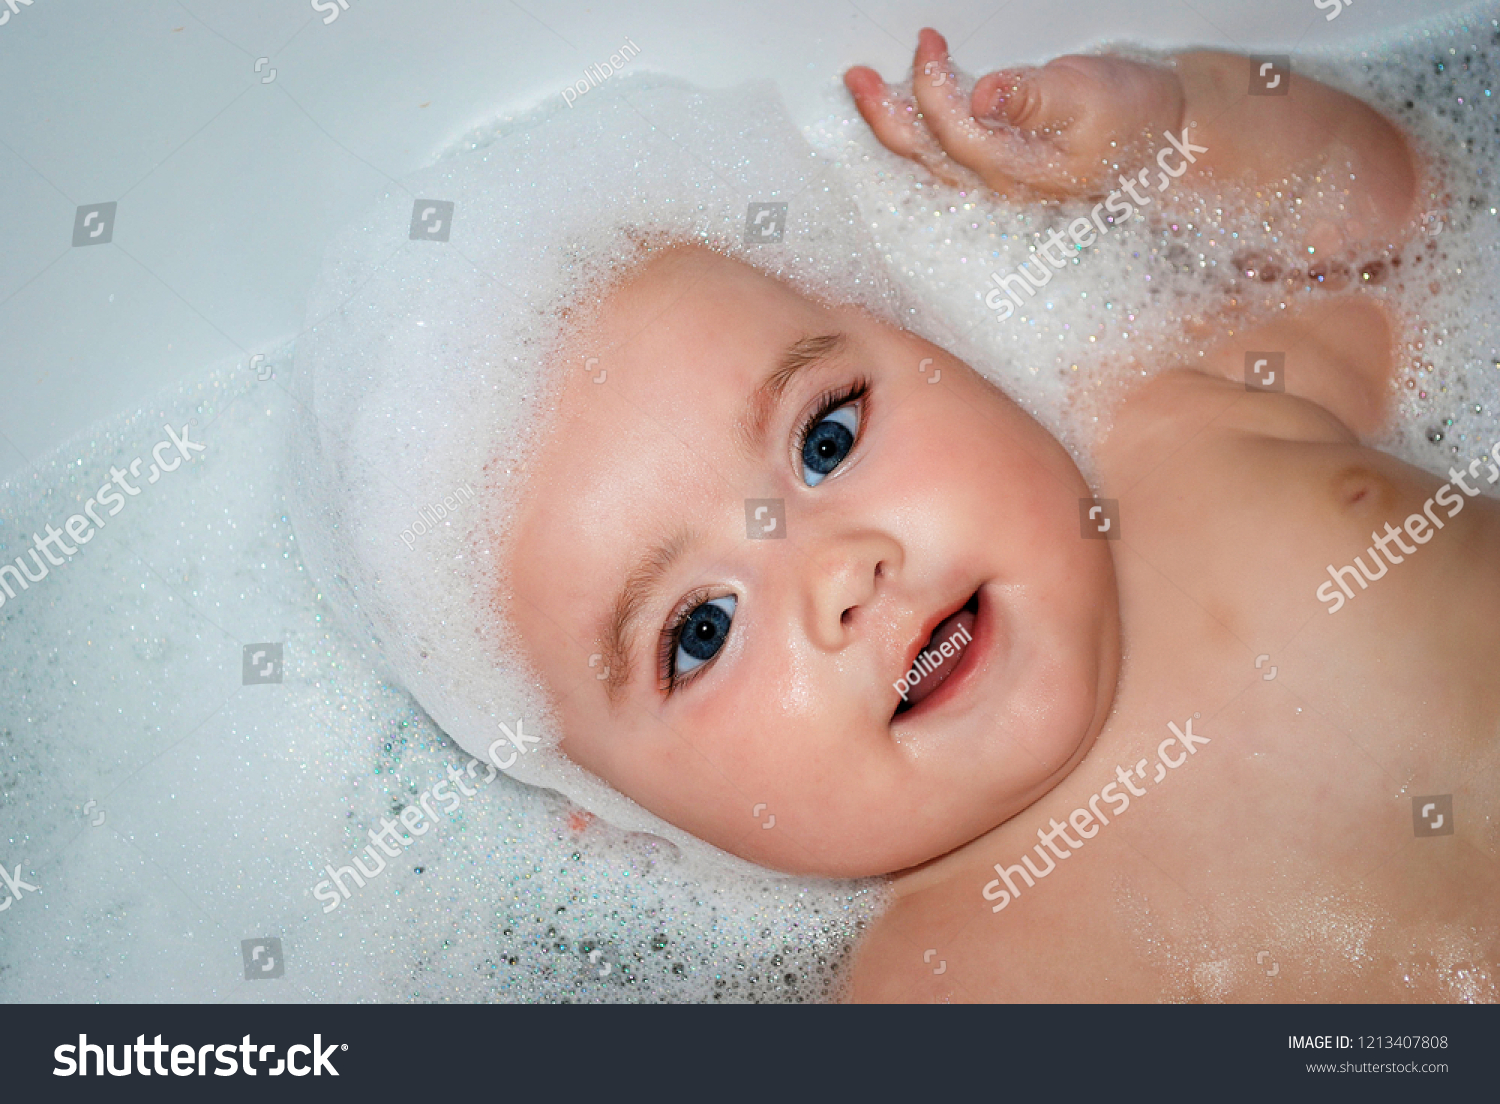 baby loves water